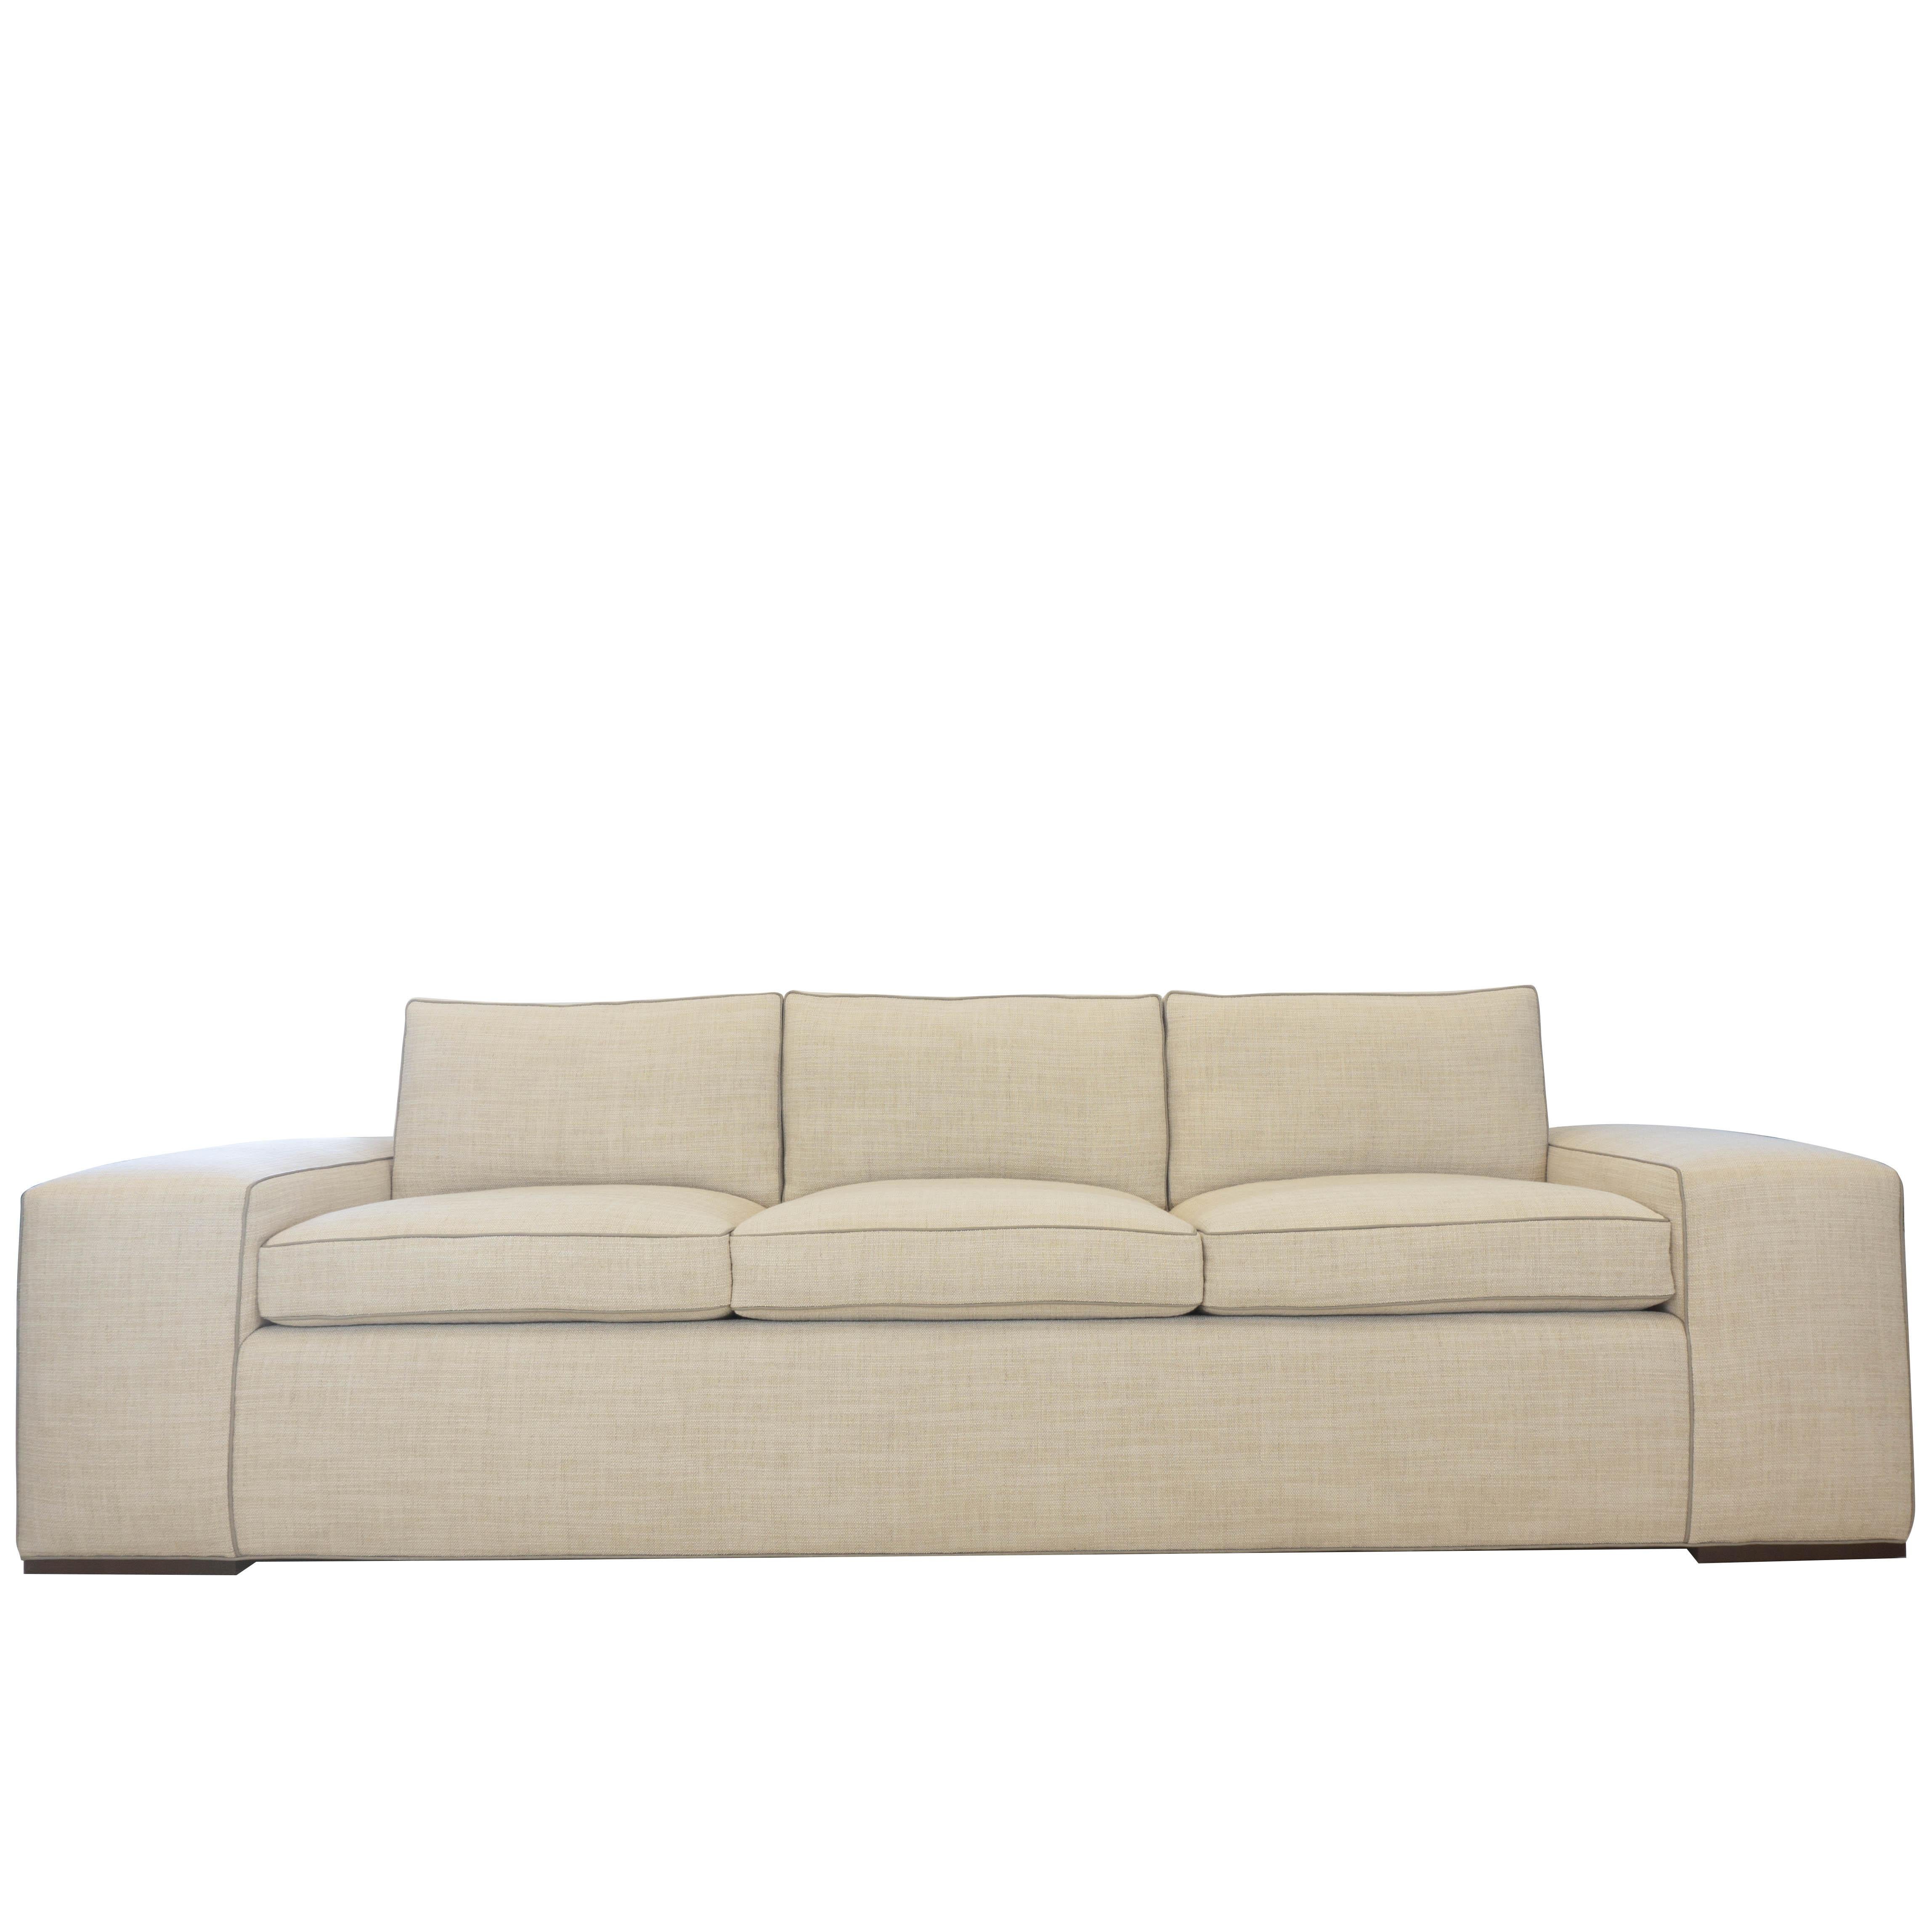 Contemporary square arm sofa with faux leather welting. Arm is 13